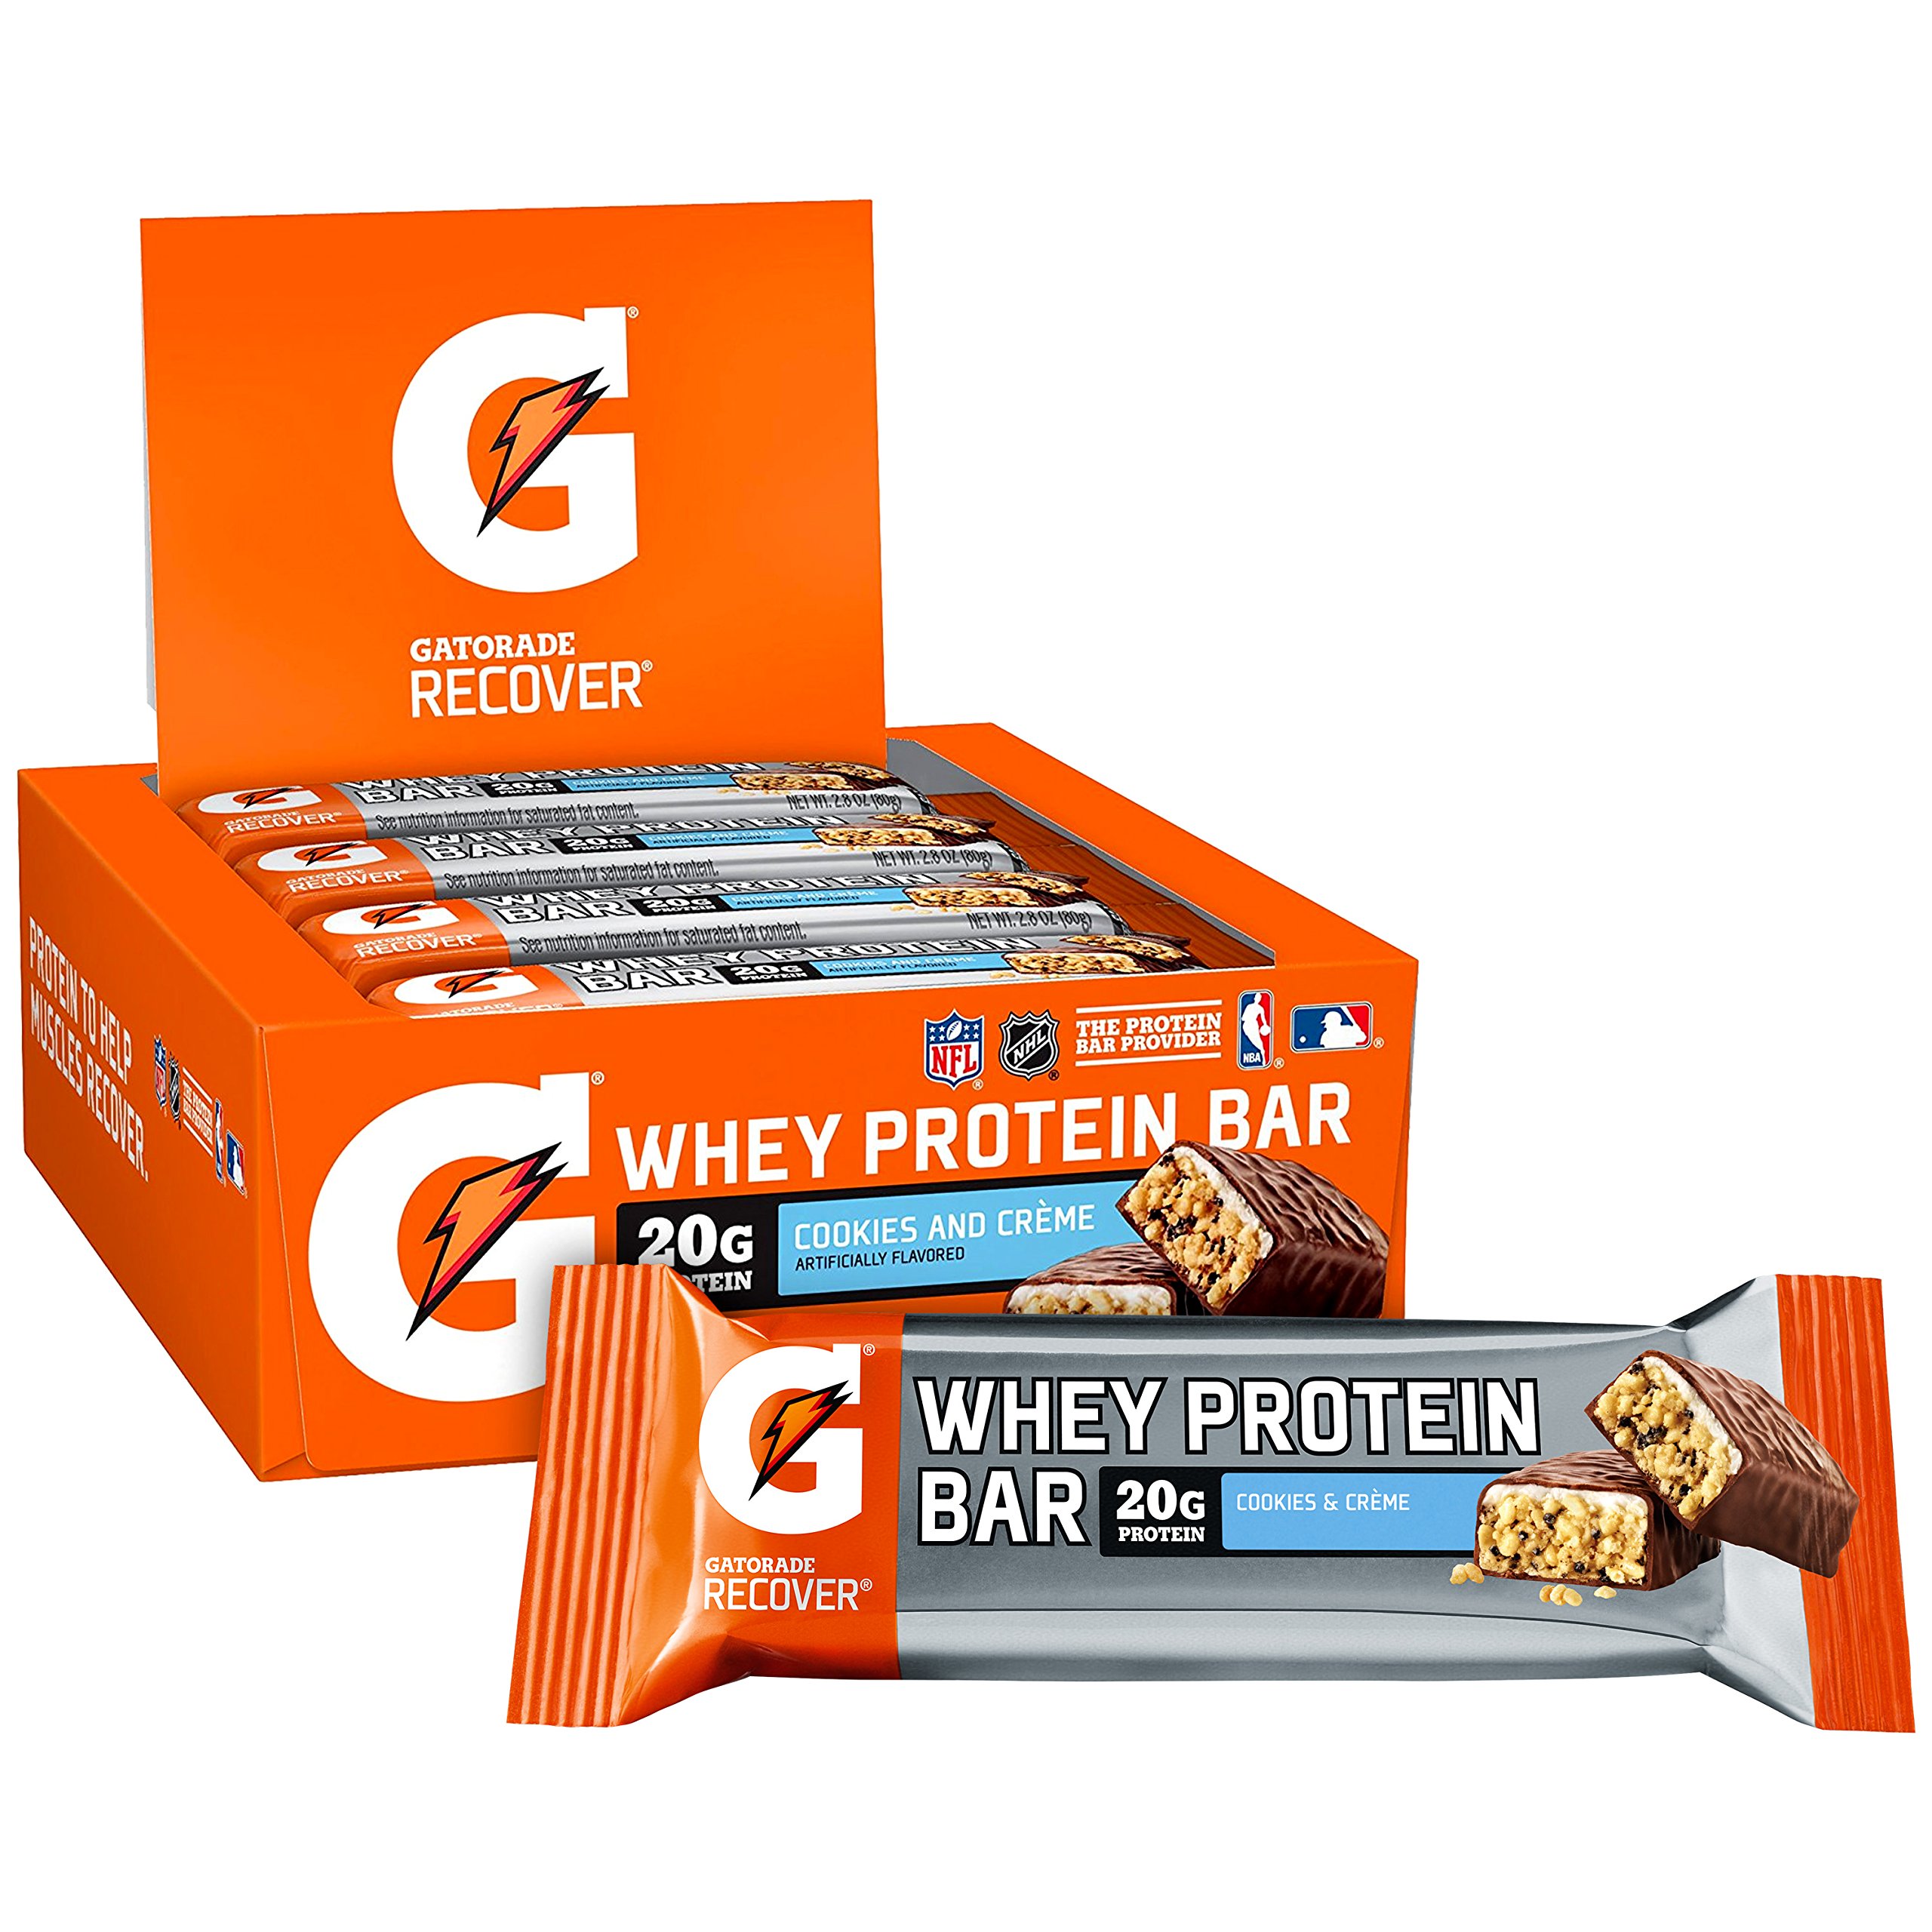 Gatorade Whey Protein Bars, Variety Pack, 2.8 oz bars (Pack of 18) & Whey Protein Bars, Cookies & Crème, 2.8 oz bars (Pack of 12, 20g of protein per bar)